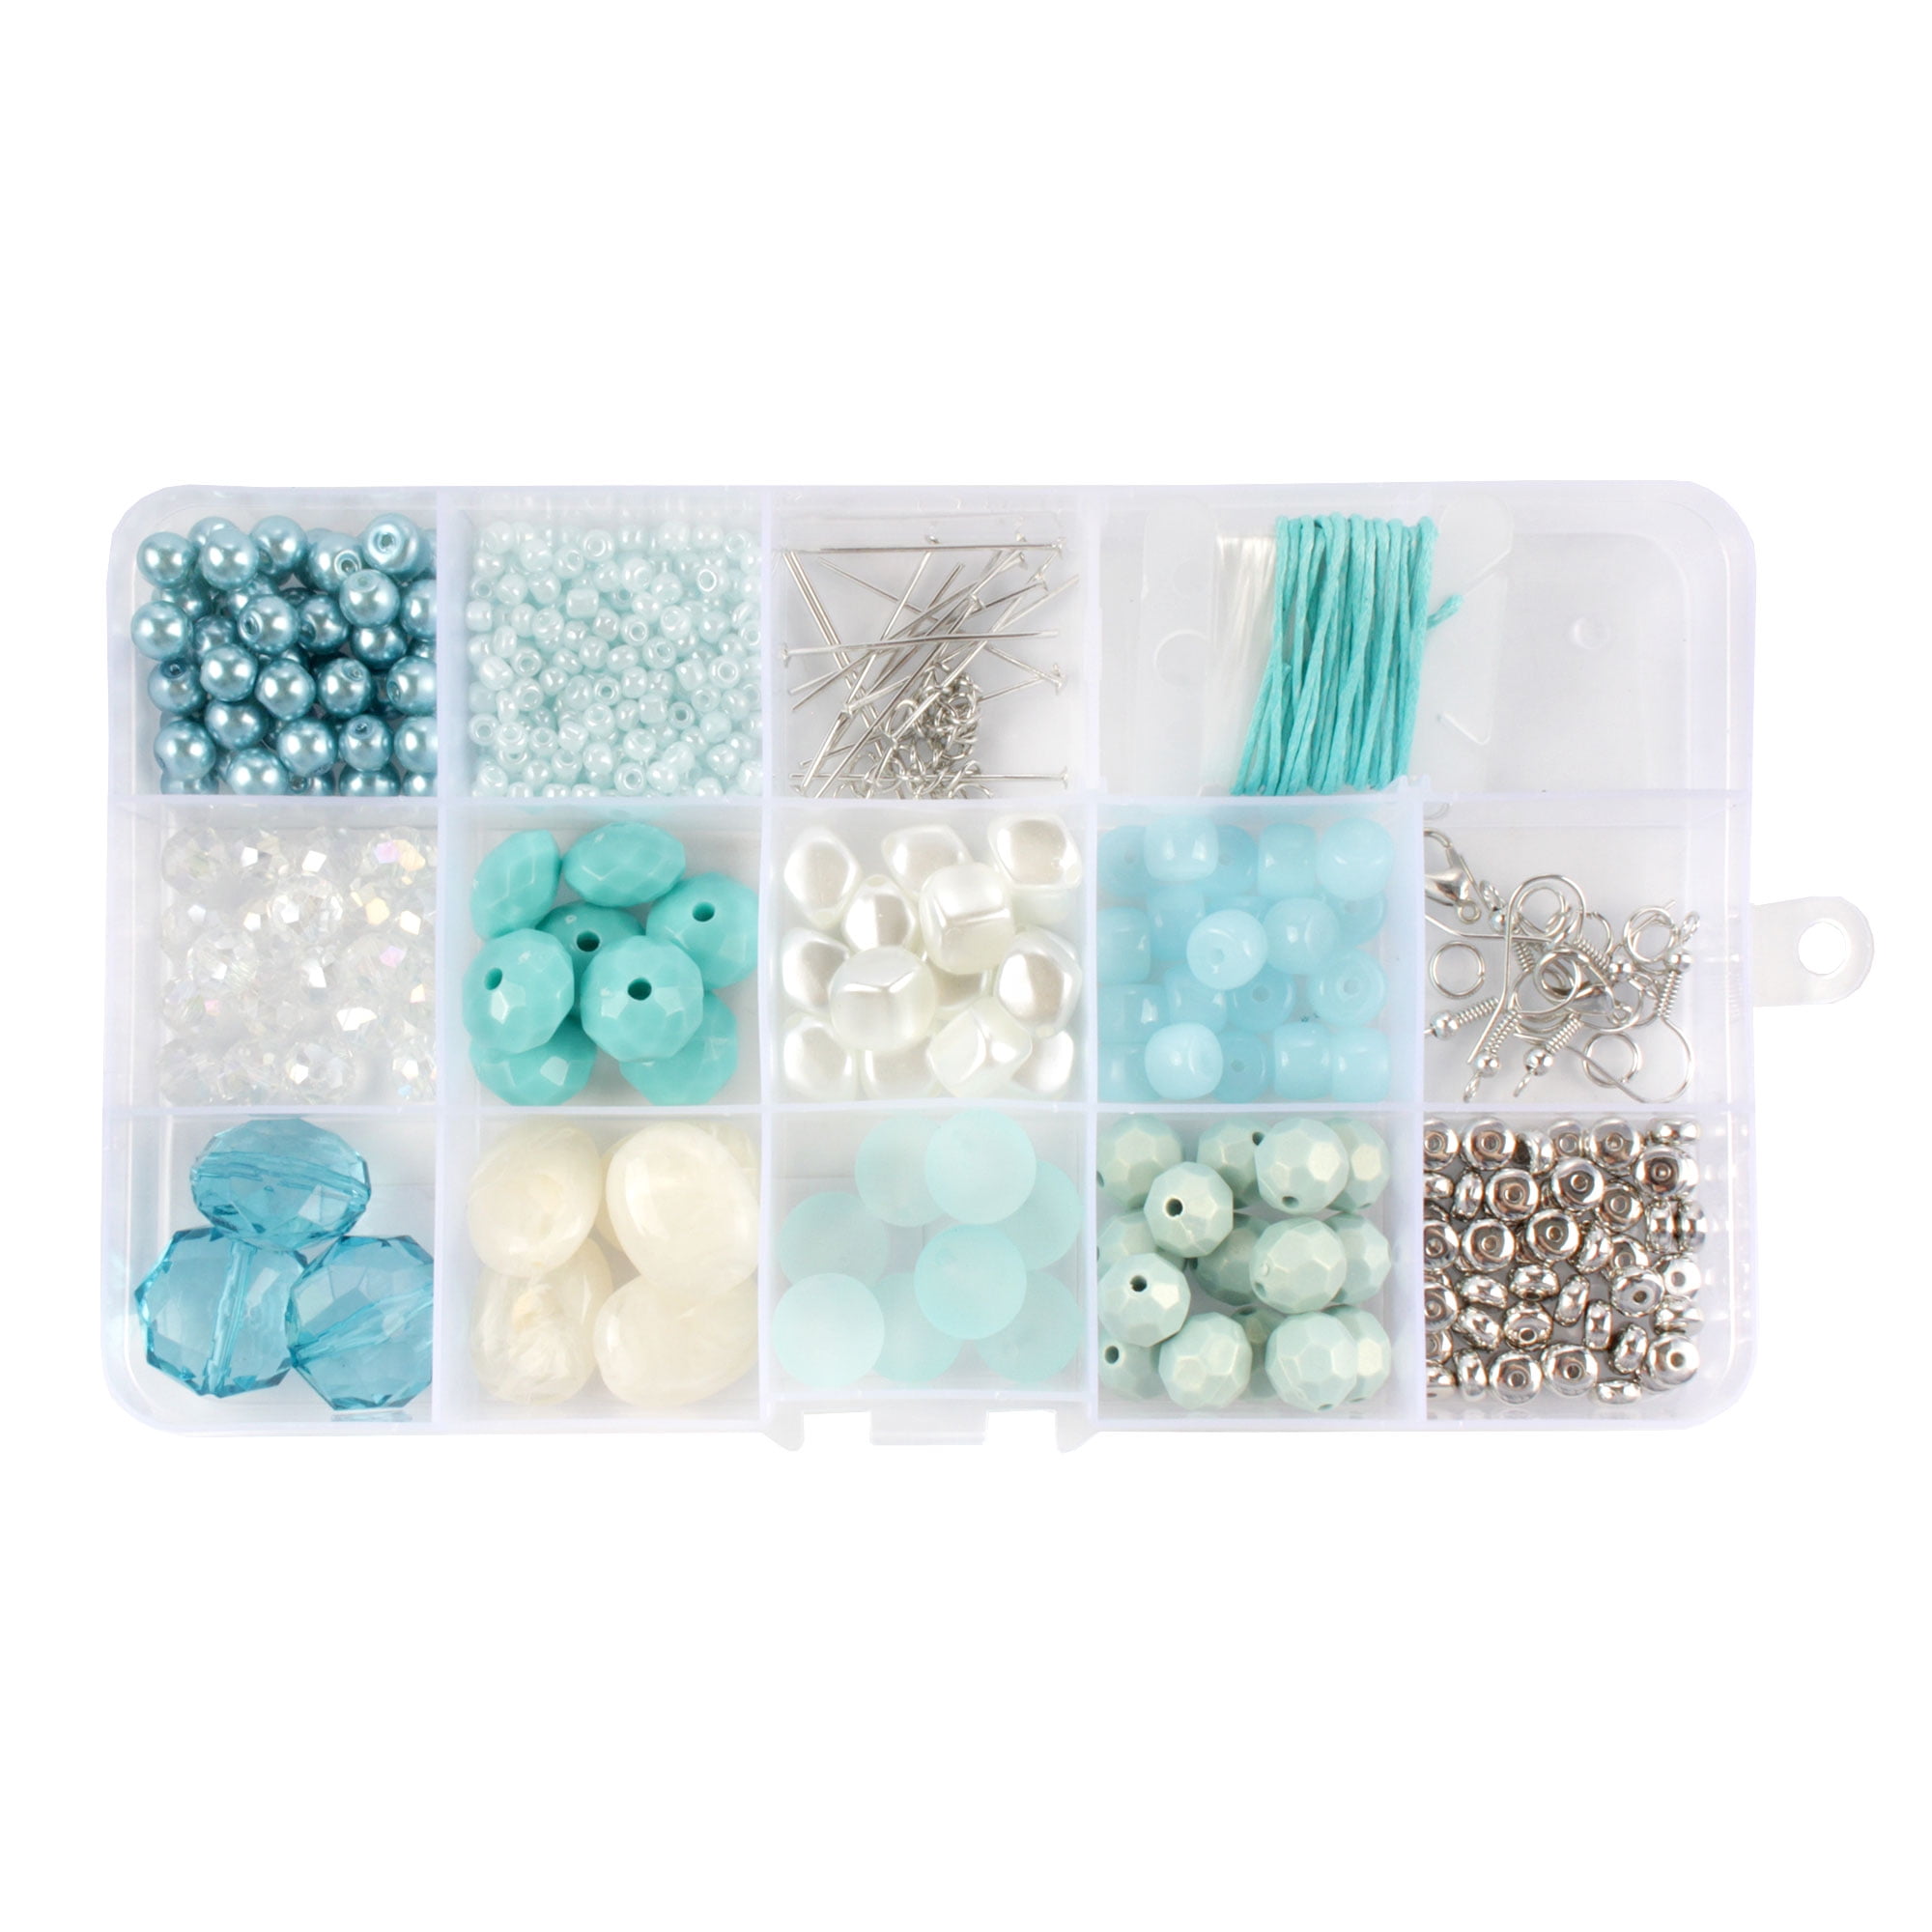  ANDYKEN Bead Kits for Jewelry Making - Craft Beads for Kids  Girls Jewelry Making Kits Colorful Acrylic Girls Bead Set Jewelry Crafting  Set : Toys & Games